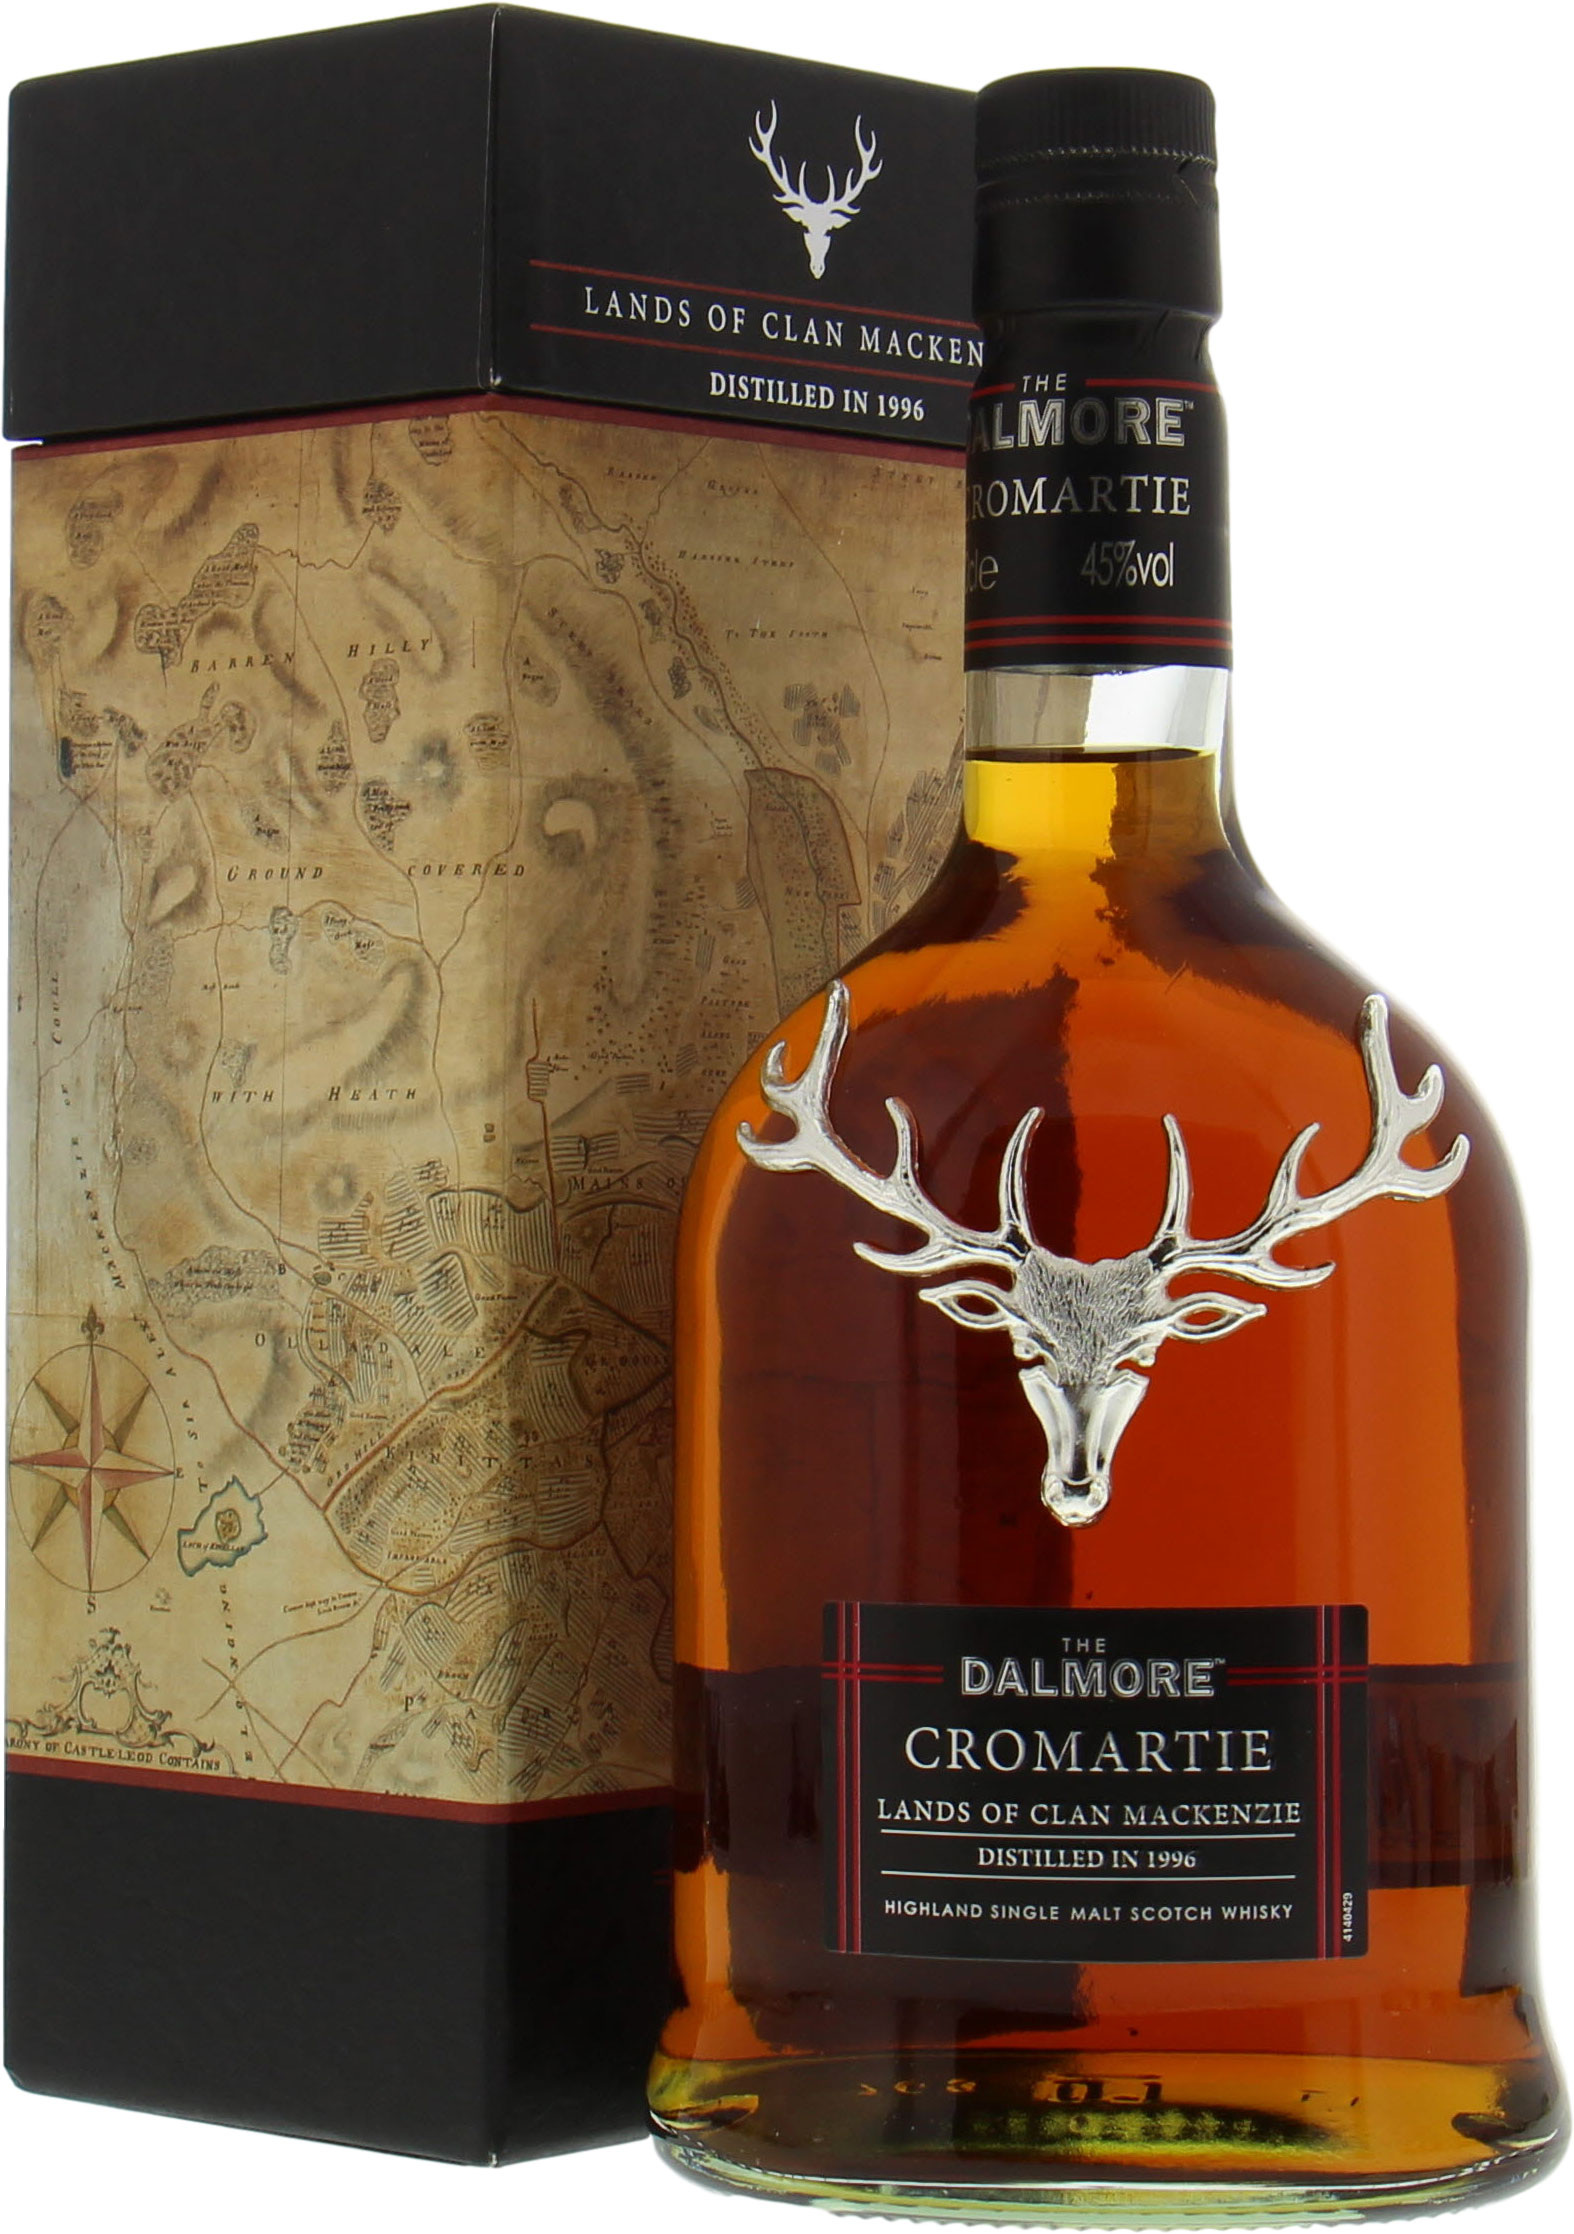 Dalmore - 15 Years Old Cromartie Lands of Clan MacKenzie 45% 1996 In Original Container